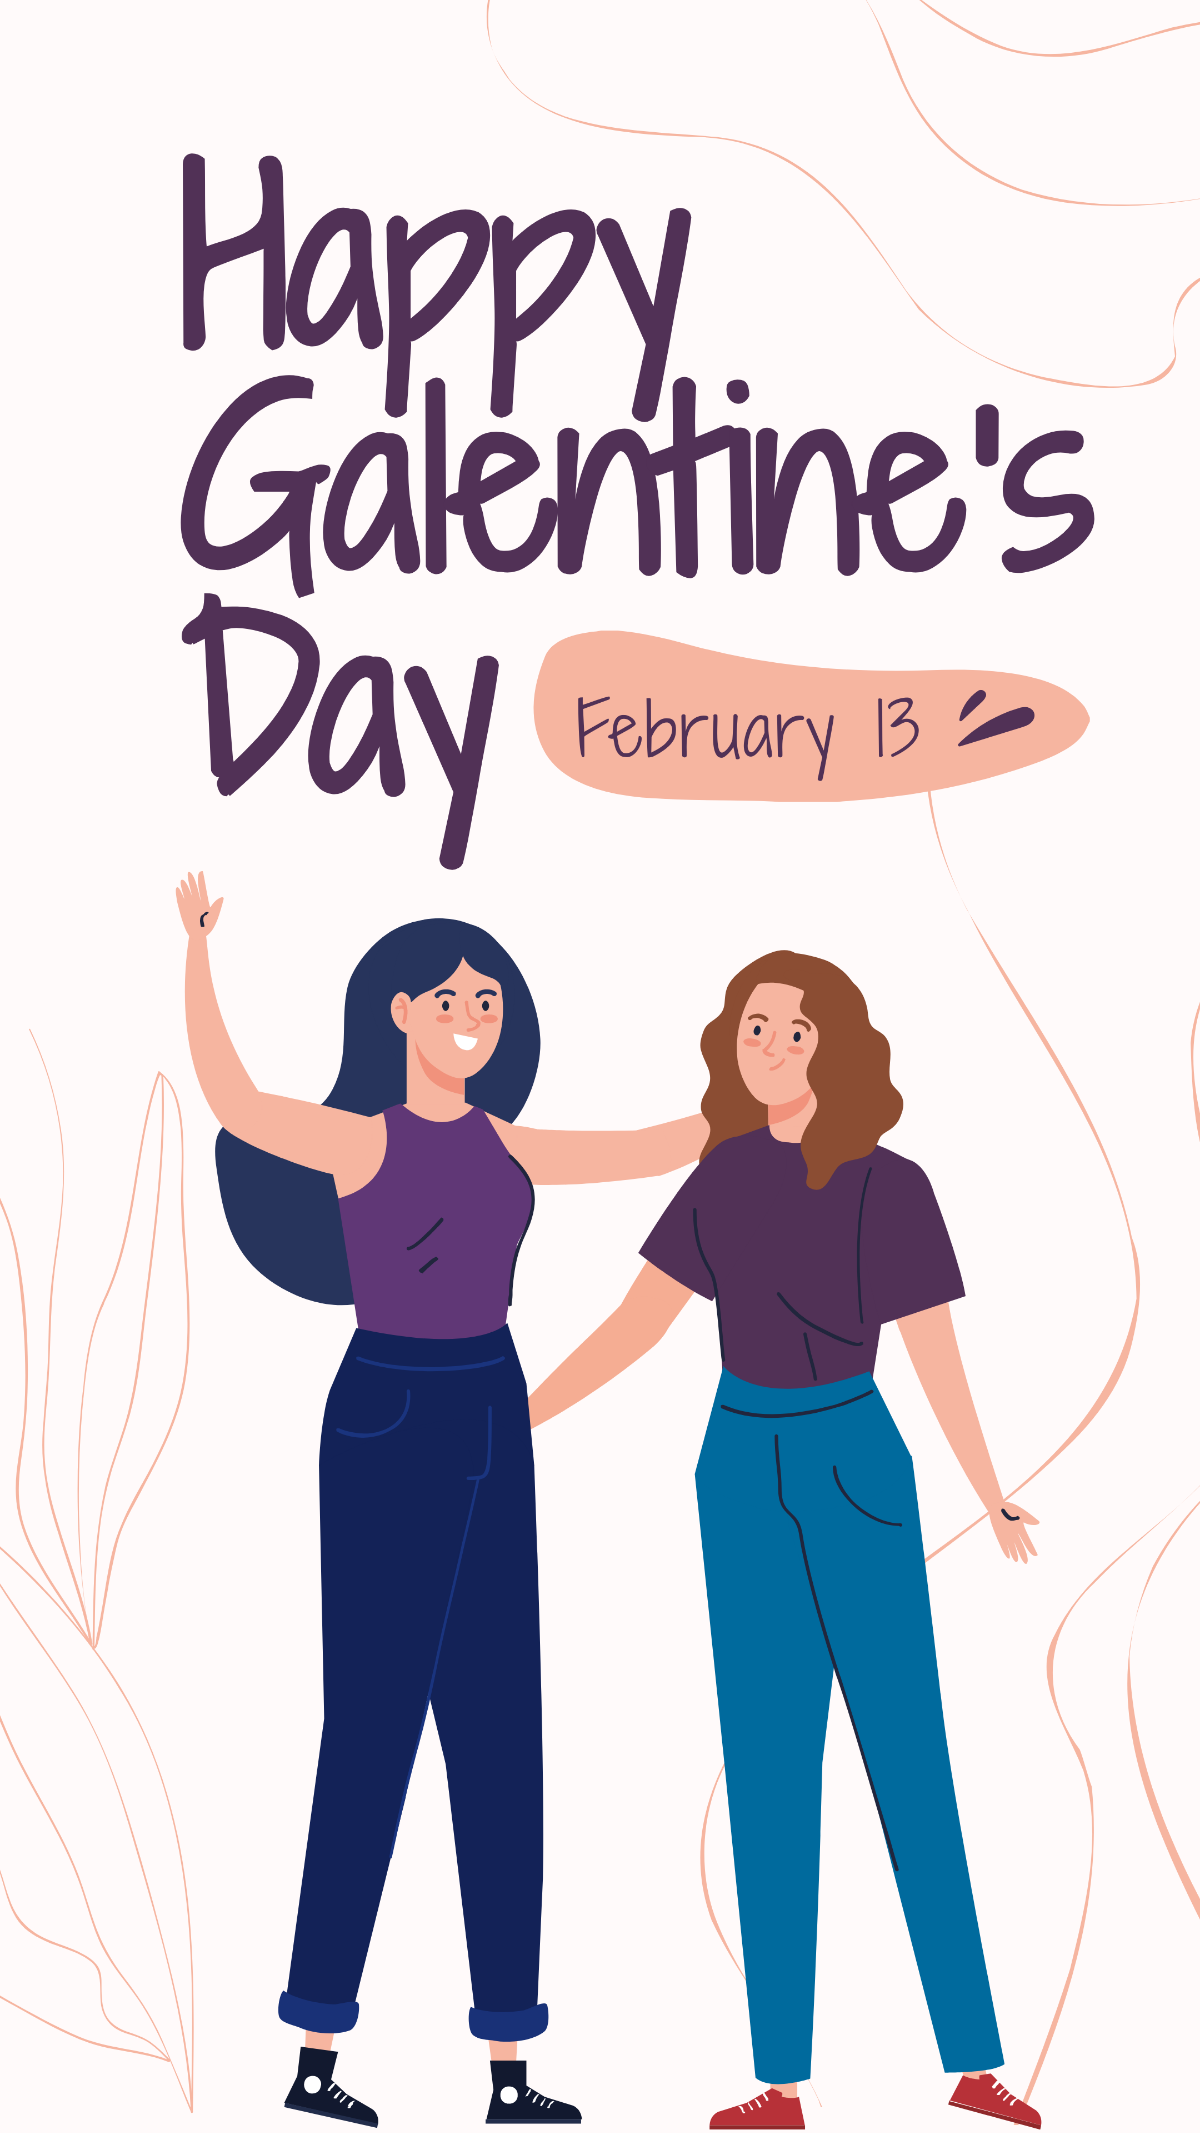 Free Happy Galentines Day Whatsapp Post Template